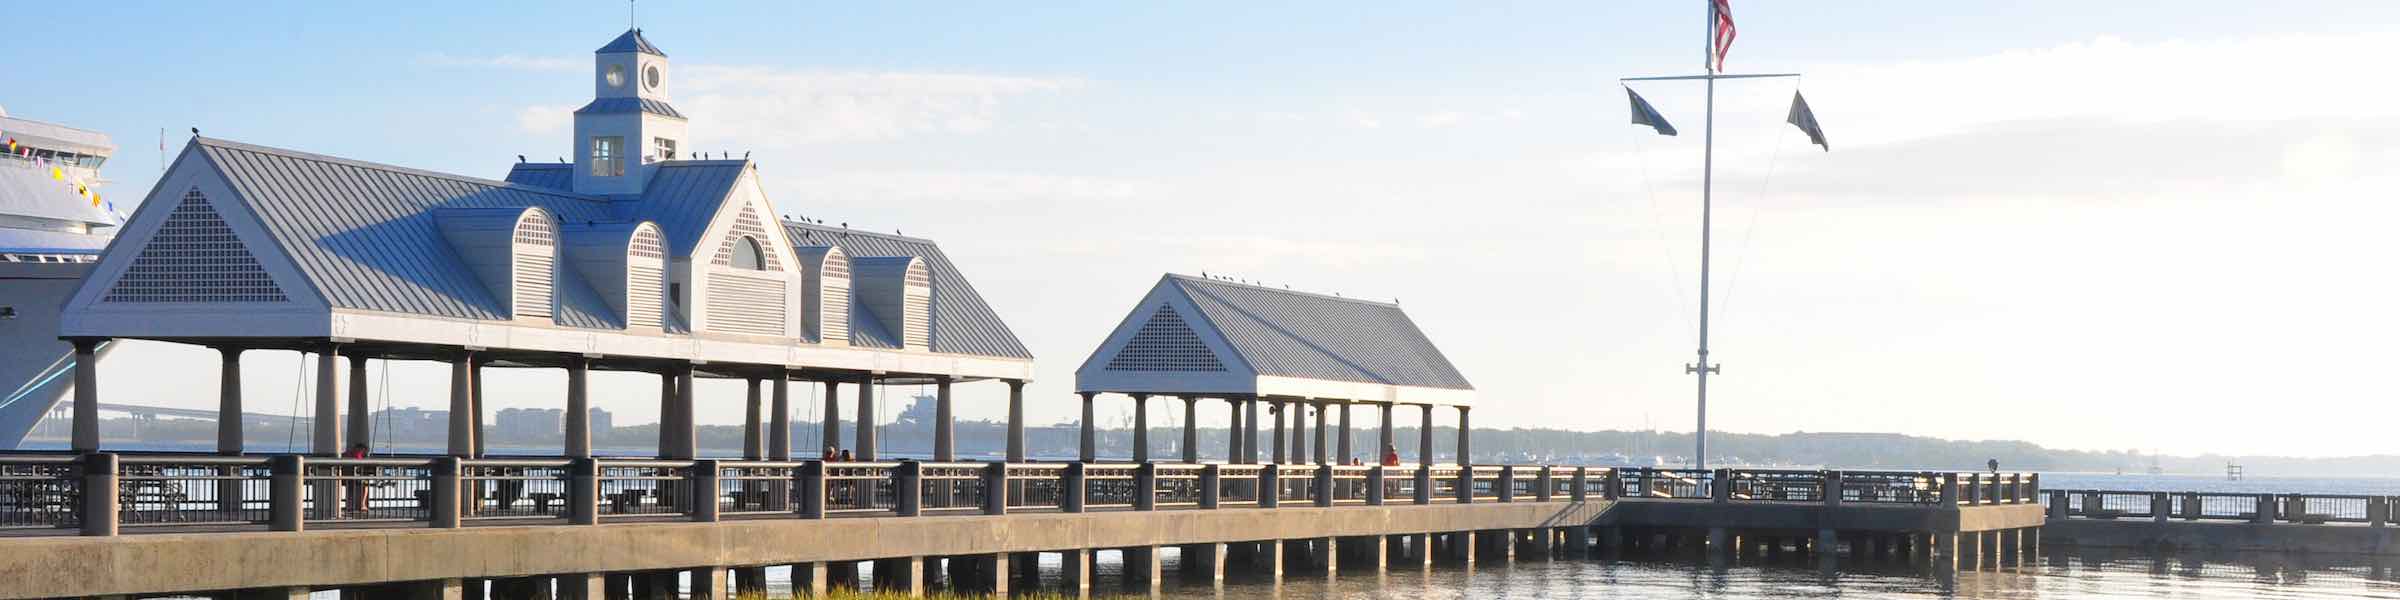 The pier at Riley Waterfront Park, Charleston, SC.